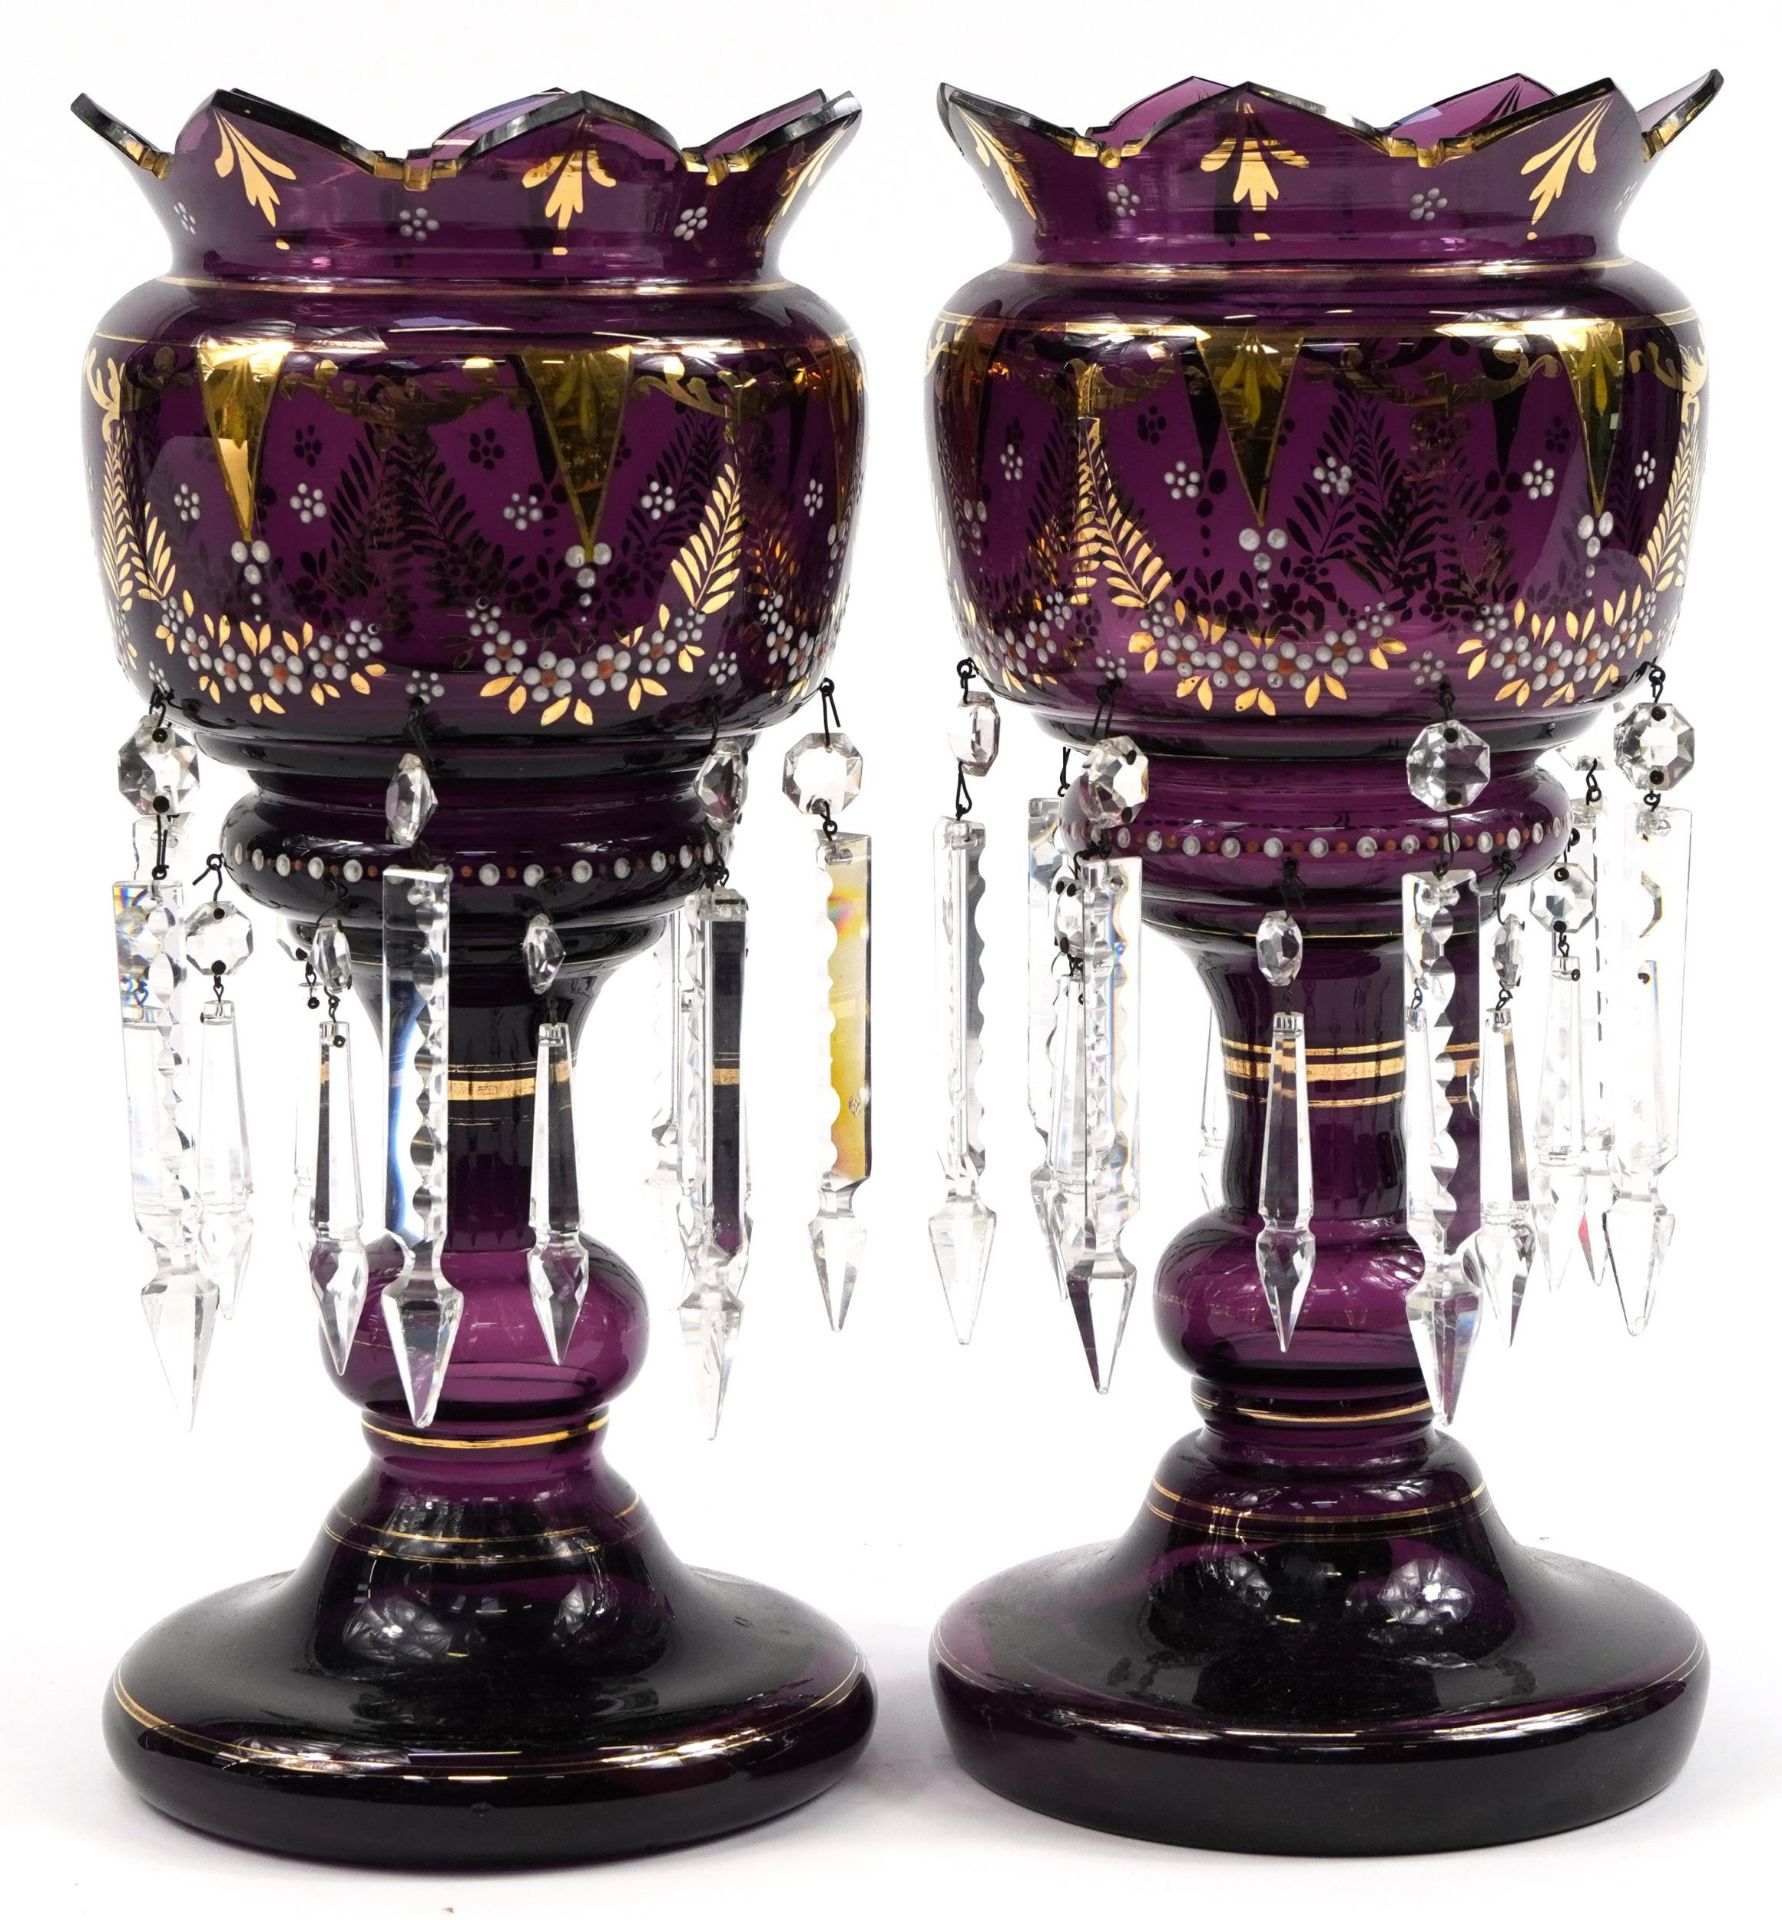 Pair of Bohemian purple glass lustre vases with cut glass drops and jewelled decoration, each 37.5cm